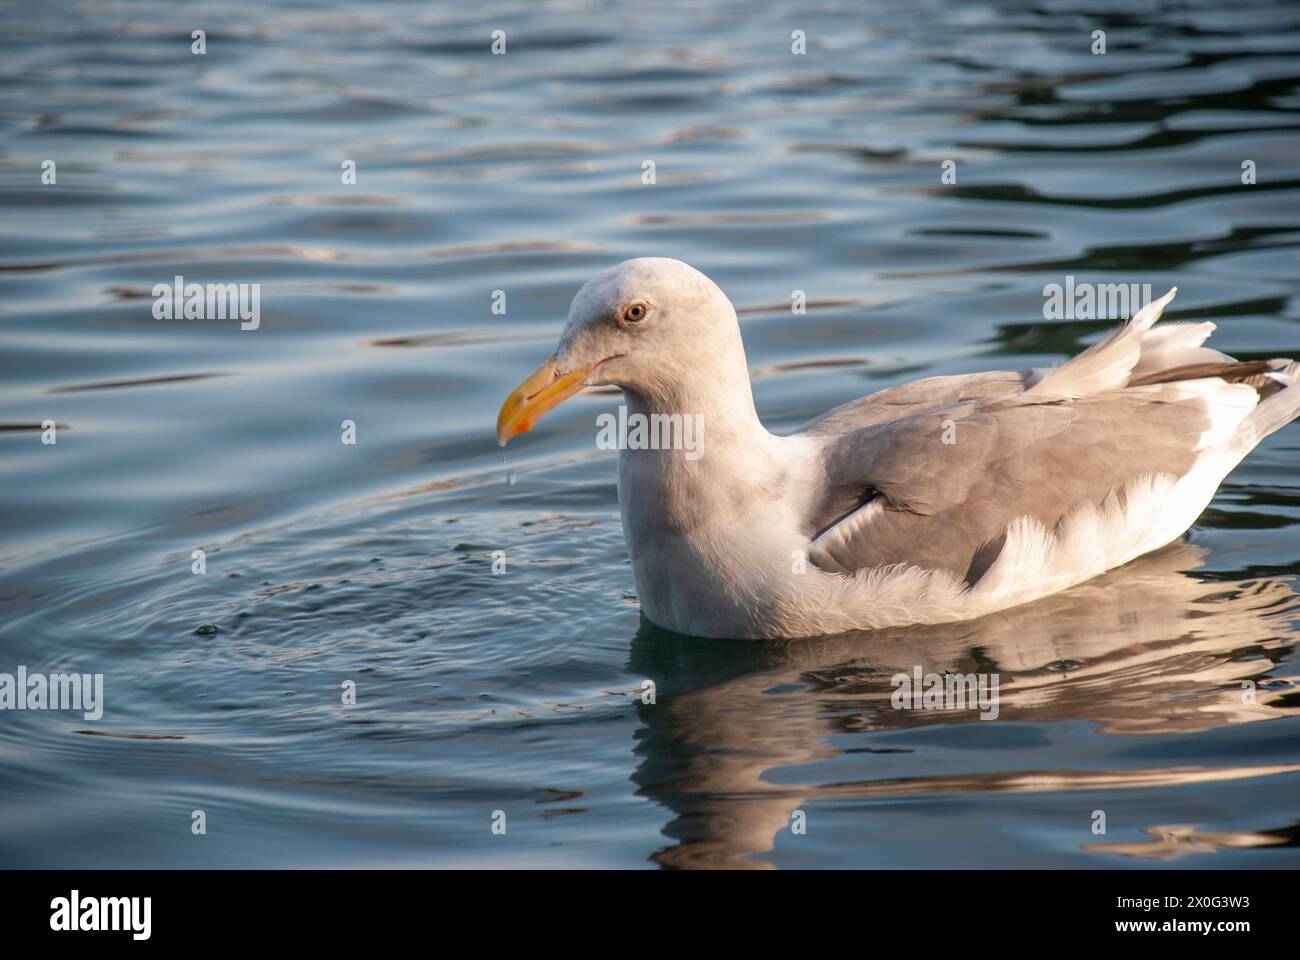 seagull in the bond oriented at the right side of the picture Stock Photo